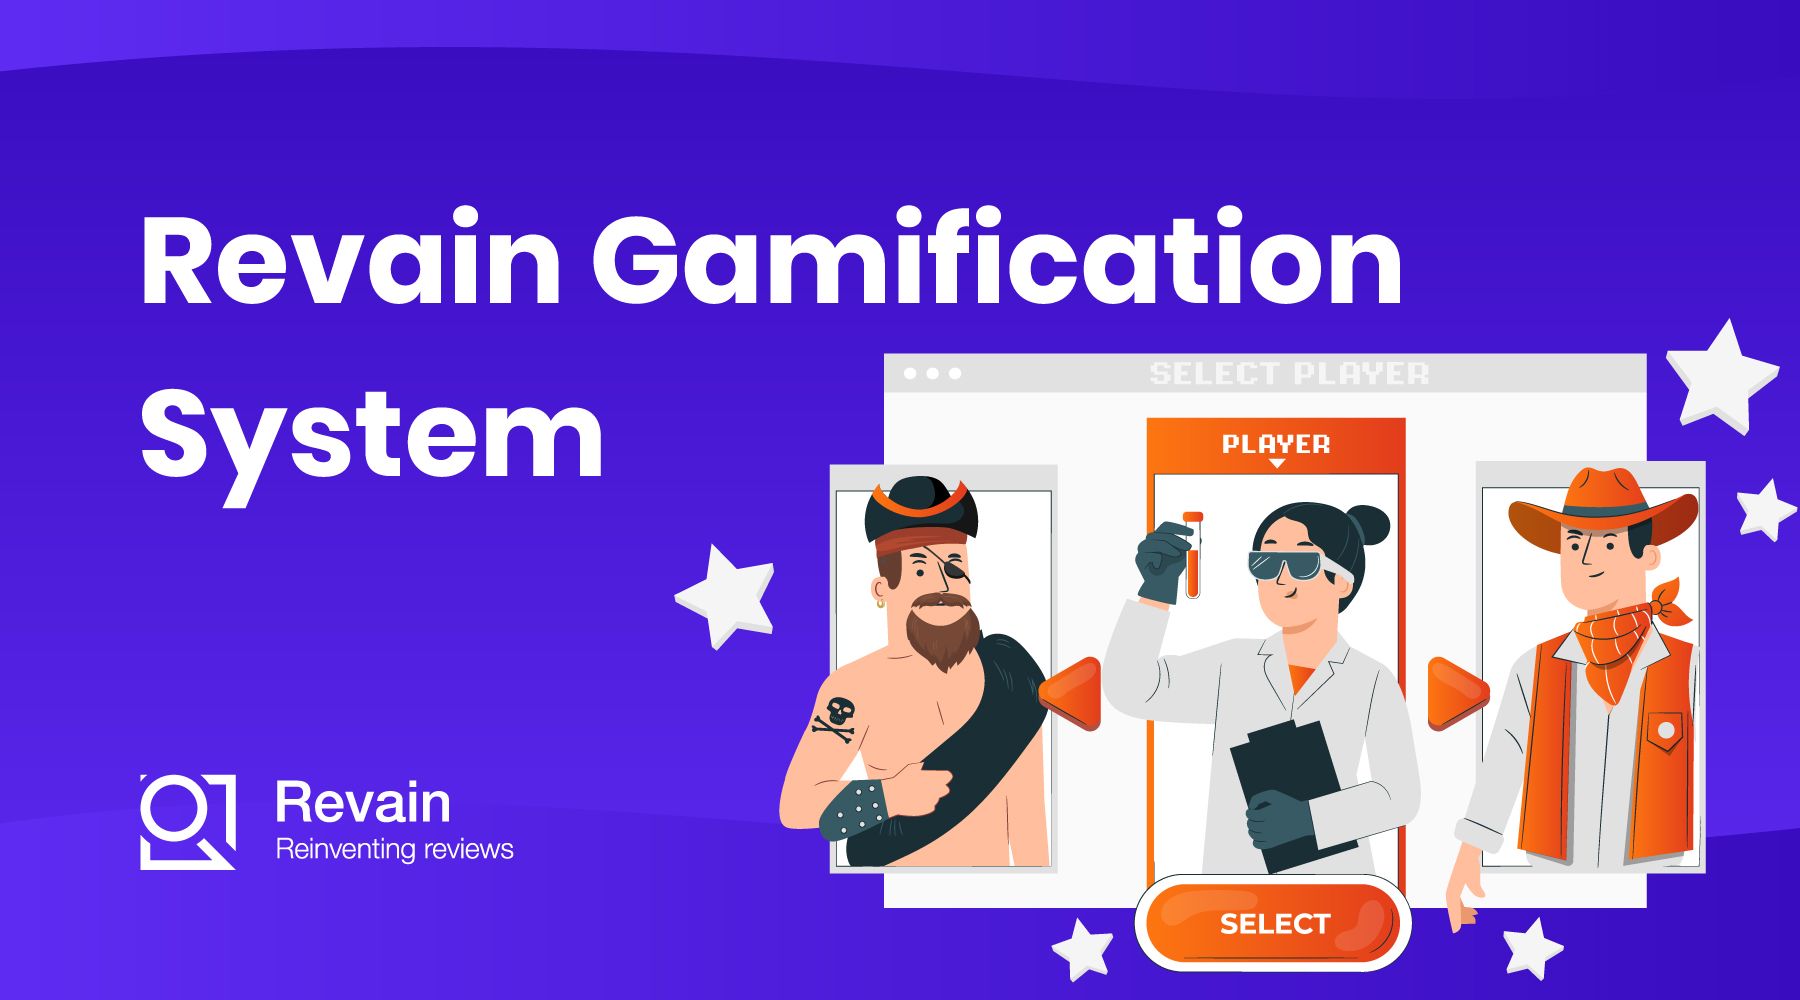 New Revain Gamification System